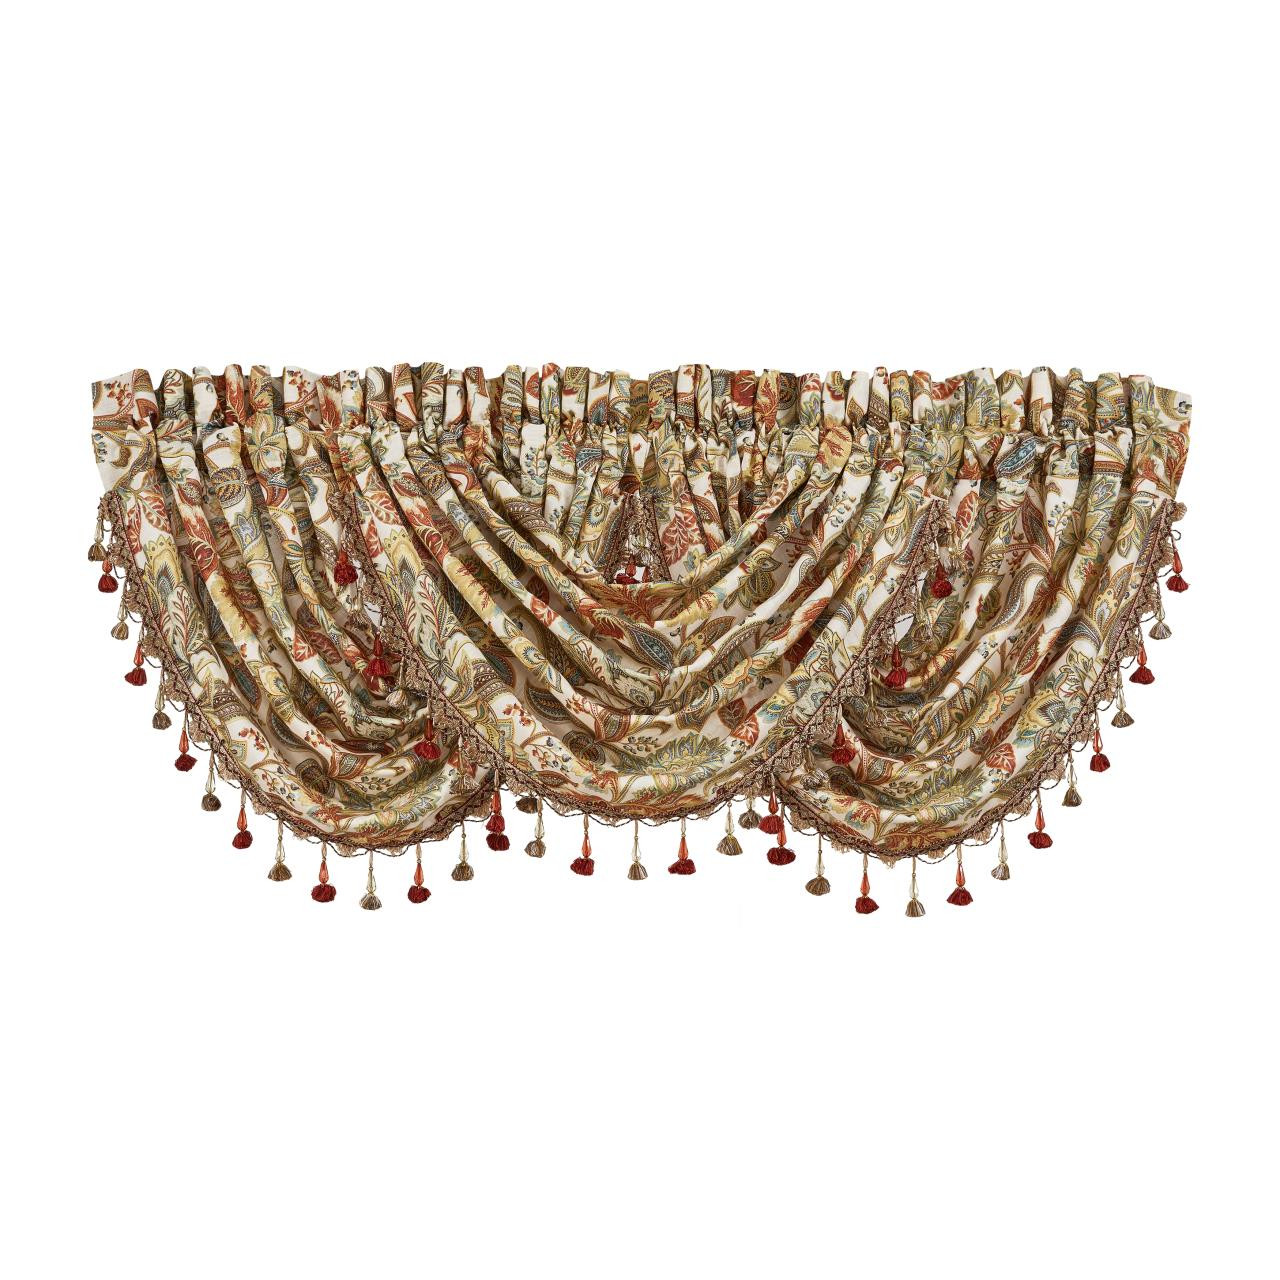 August Waterfall Valance - 193842103296